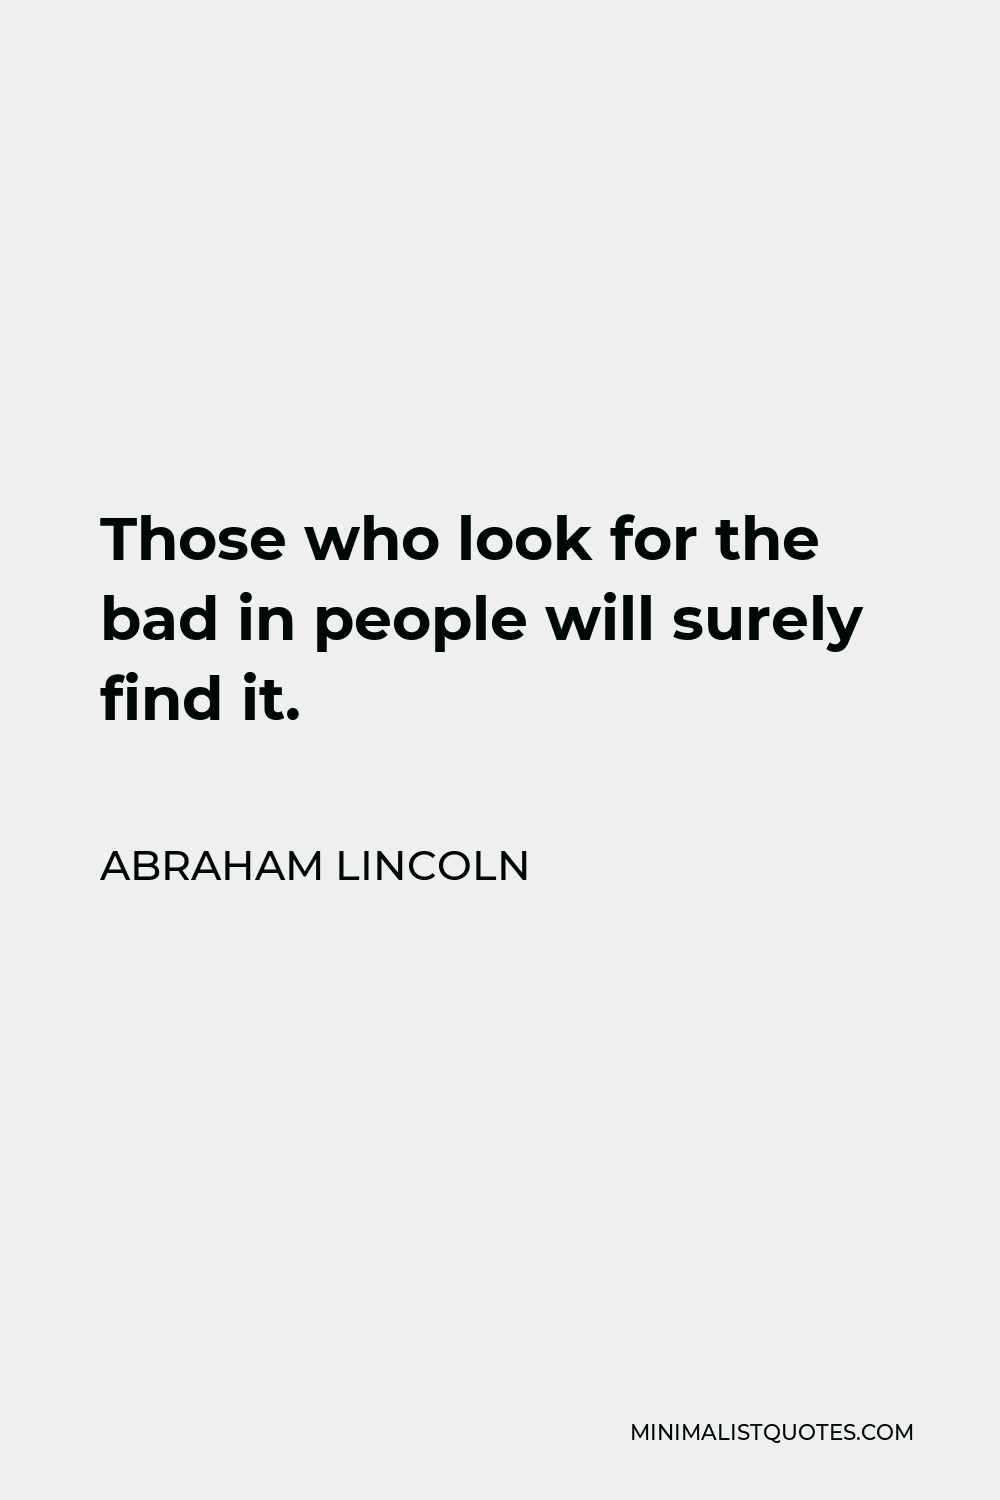 Abraham Lincoln Quote - Those who look for the bad in people will surely find it.